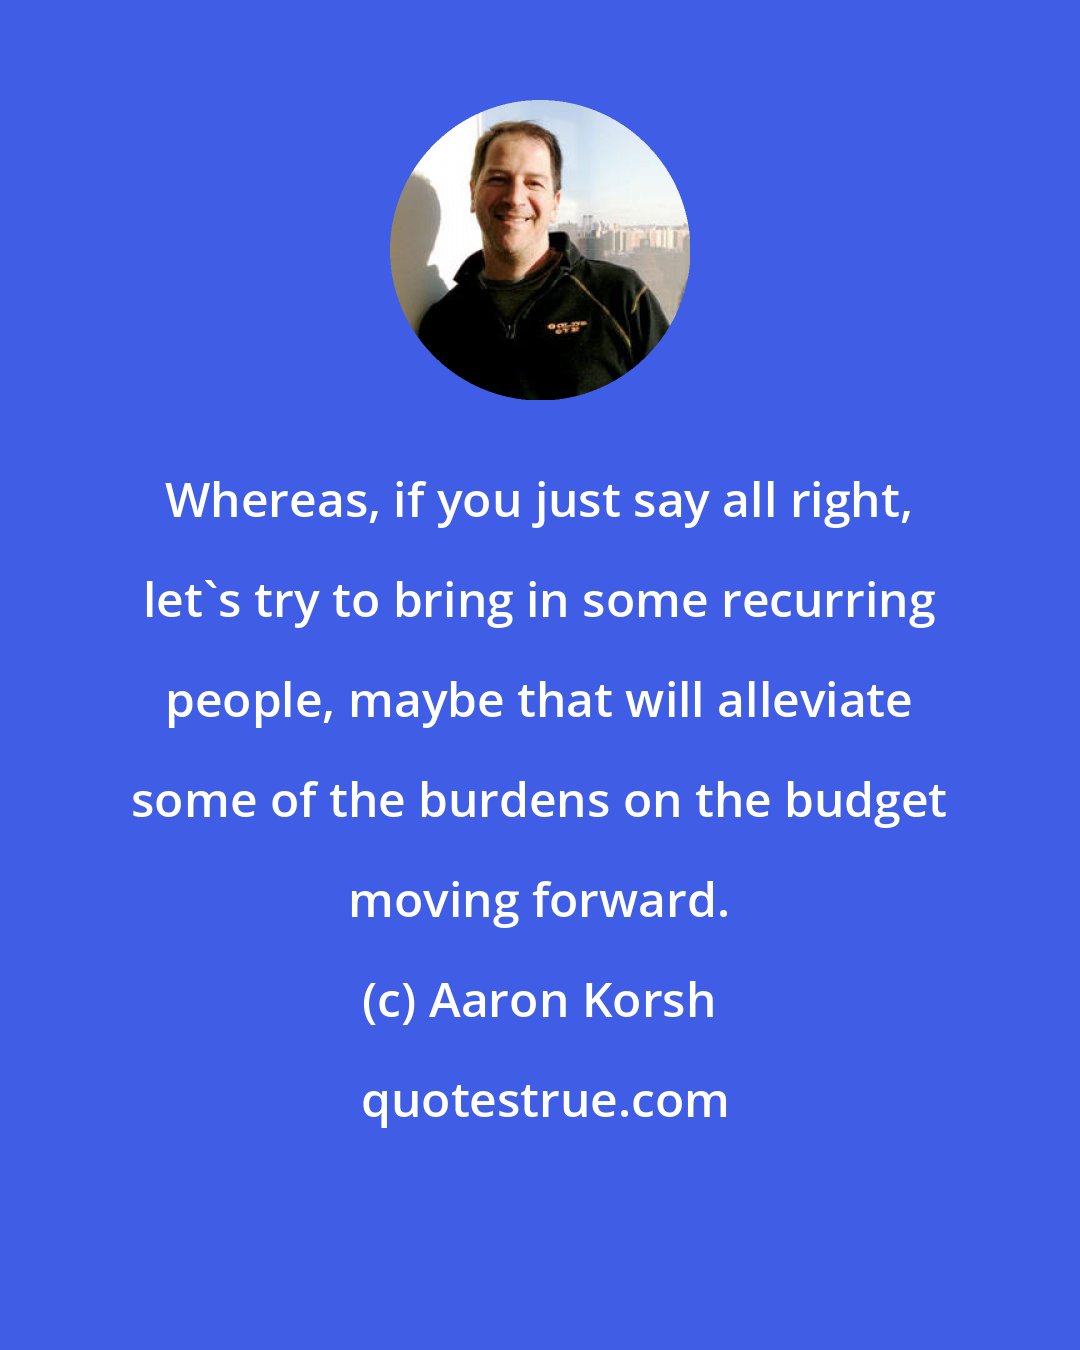 Aaron Korsh: Whereas, if you just say all right, let's try to bring in some recurring people, maybe that will alleviate some of the burdens on the budget moving forward.